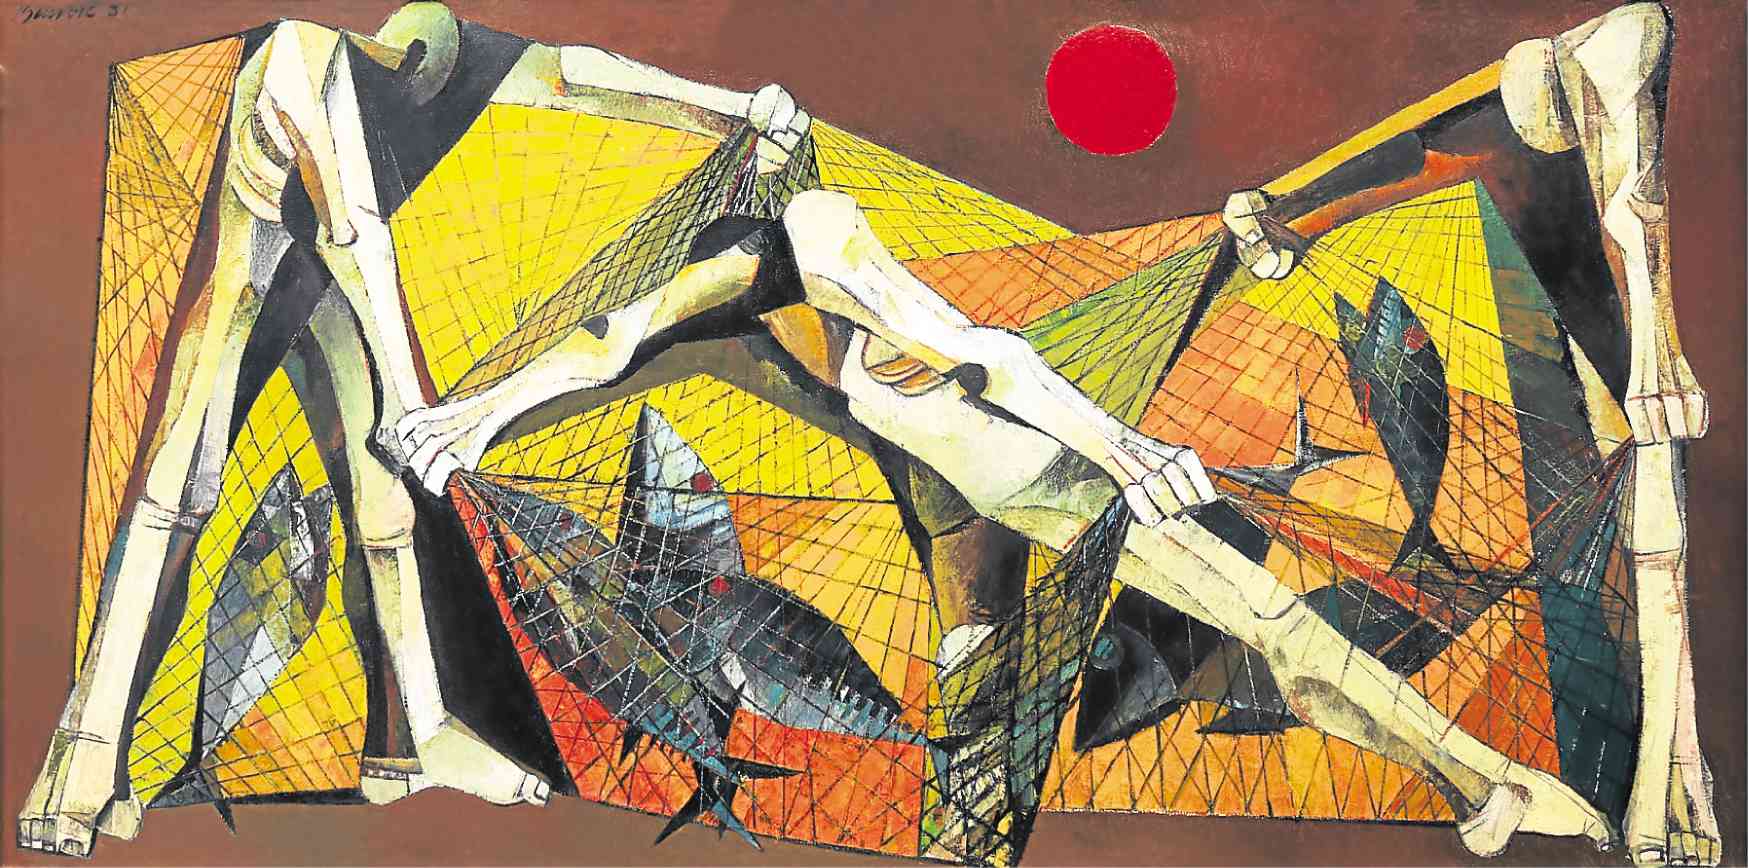 Top 10 most expensive Philippine art works sold on auction | Inquirer